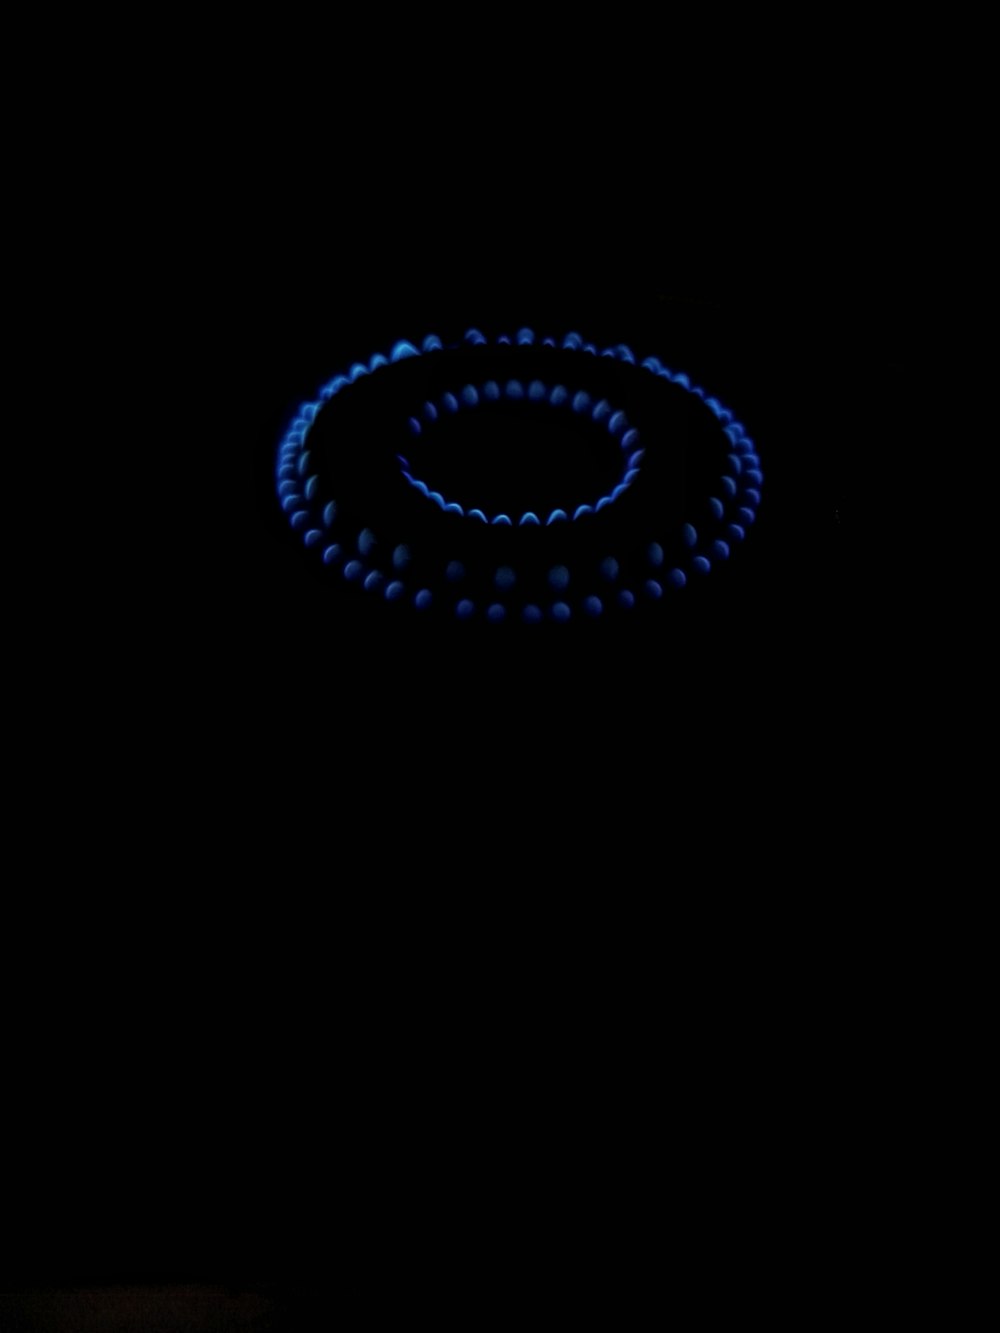 a black background with a blue ring in the middle